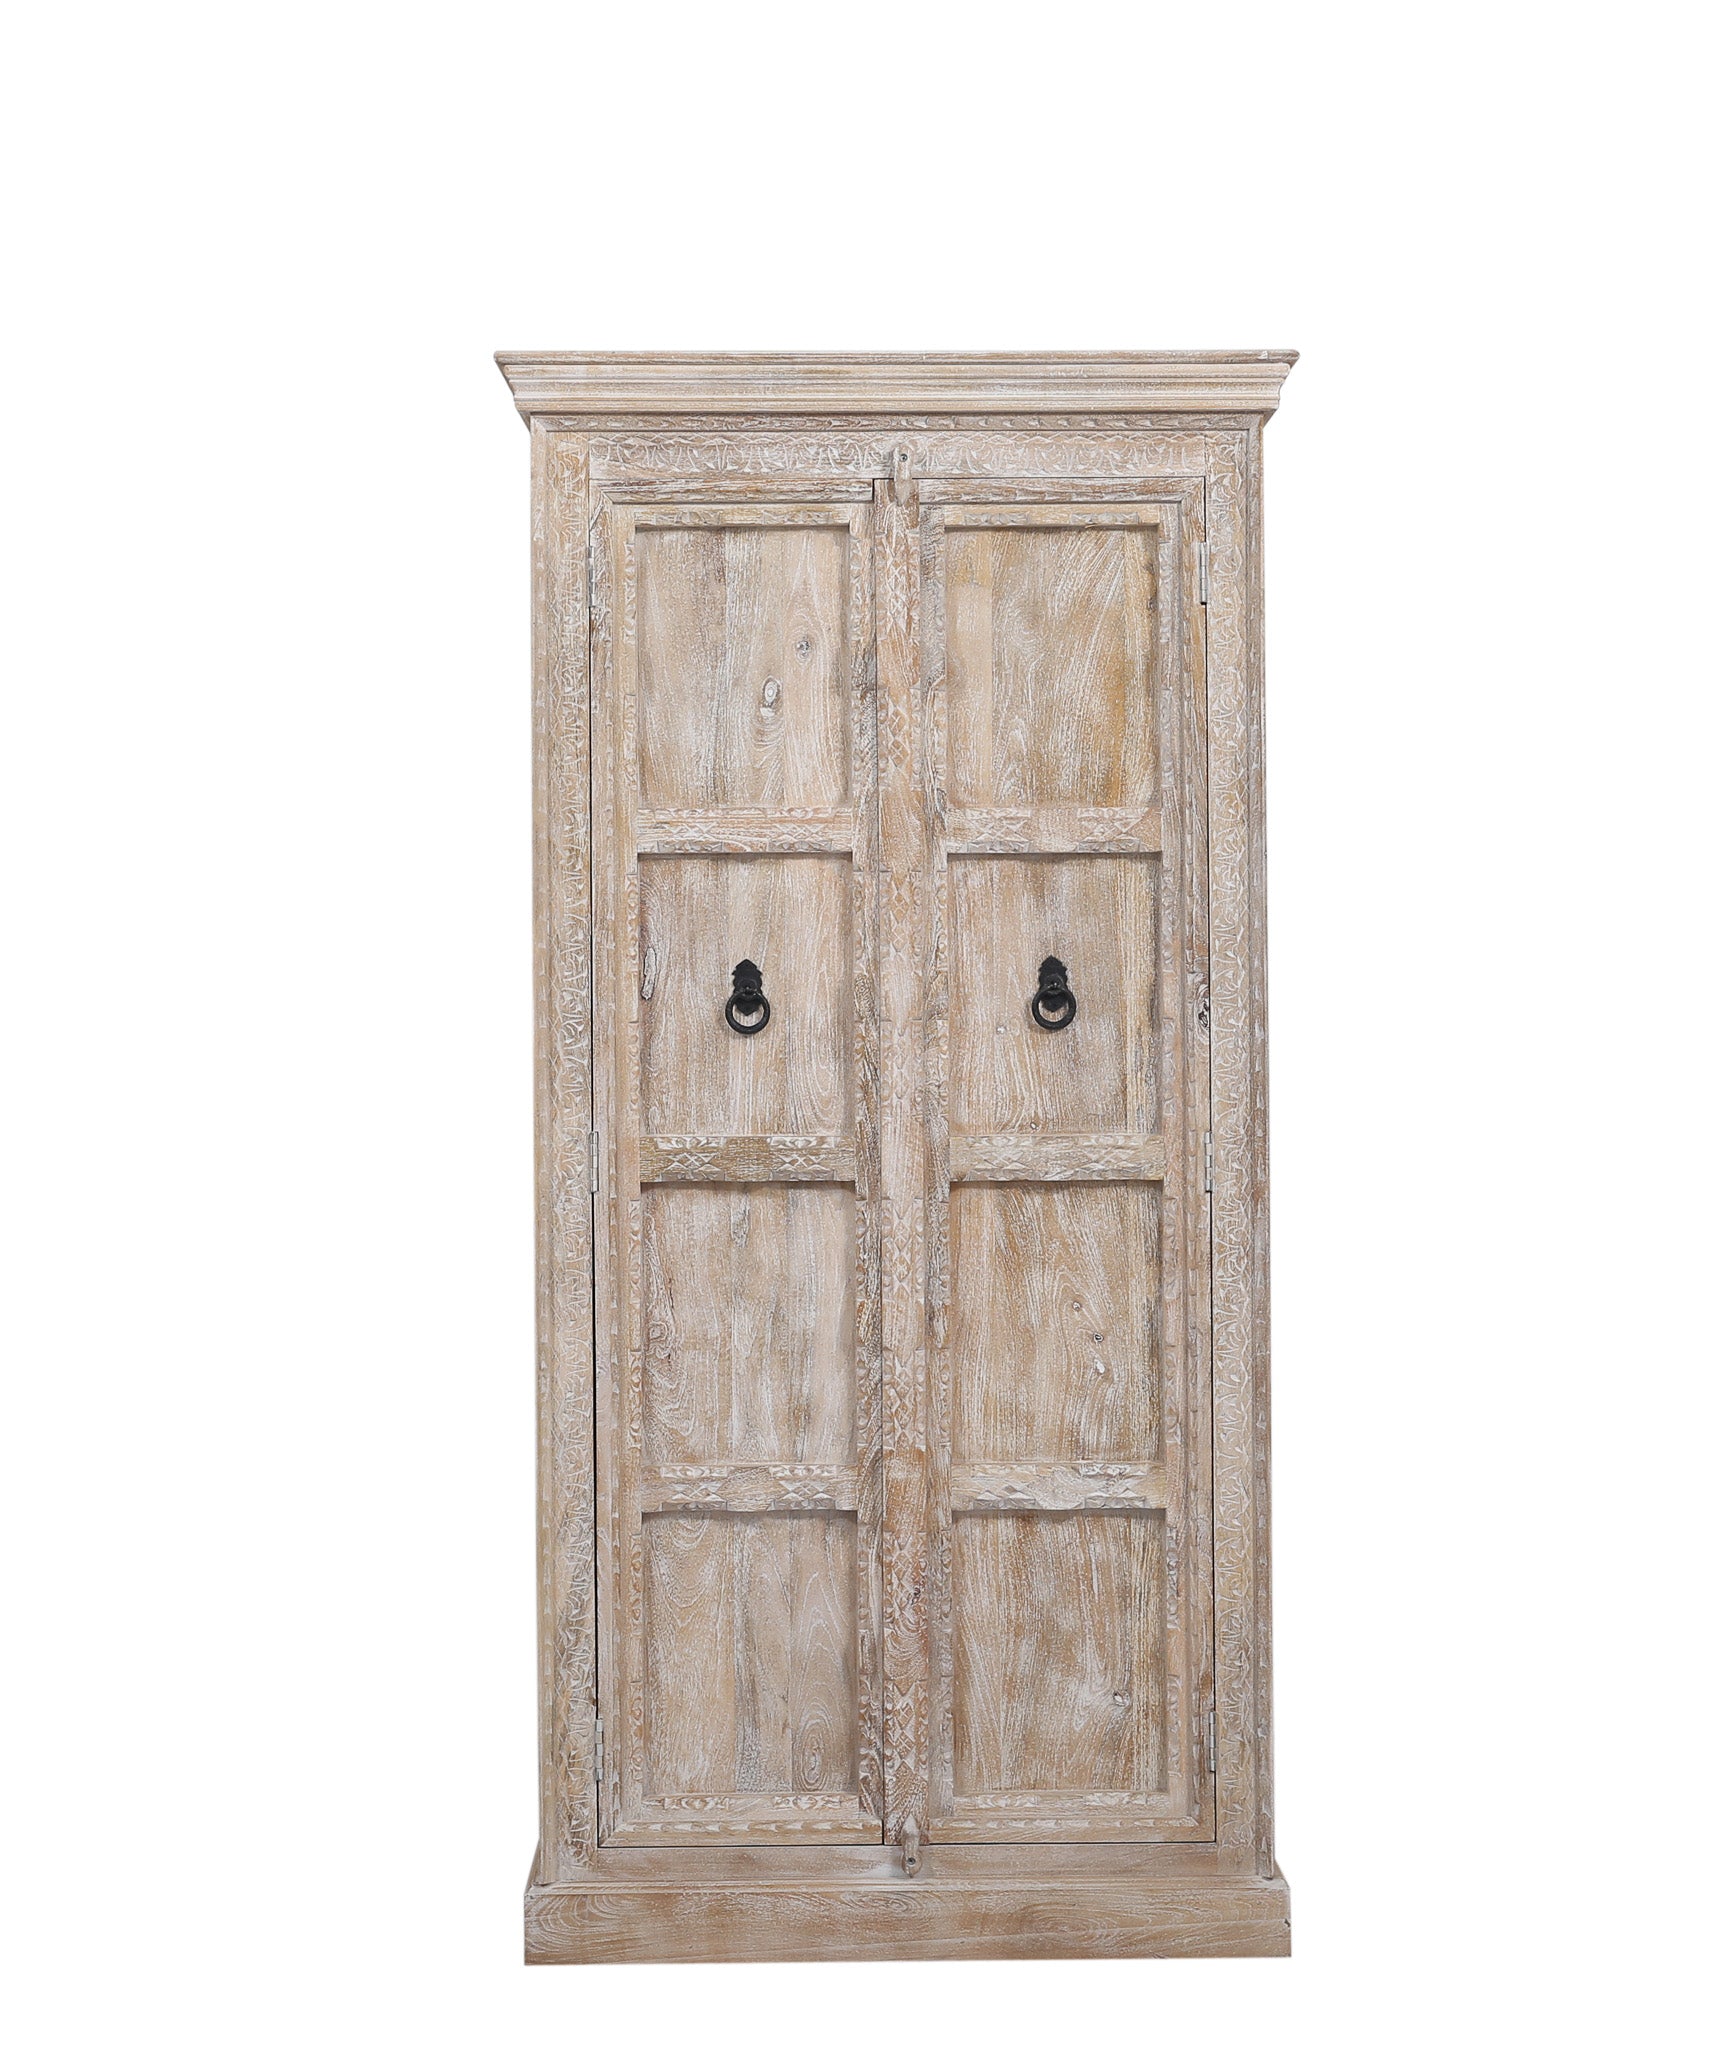 Mahala Nomad Wooden Cabinet in Distressed Natural Finish in Cabinets by VMInnovations